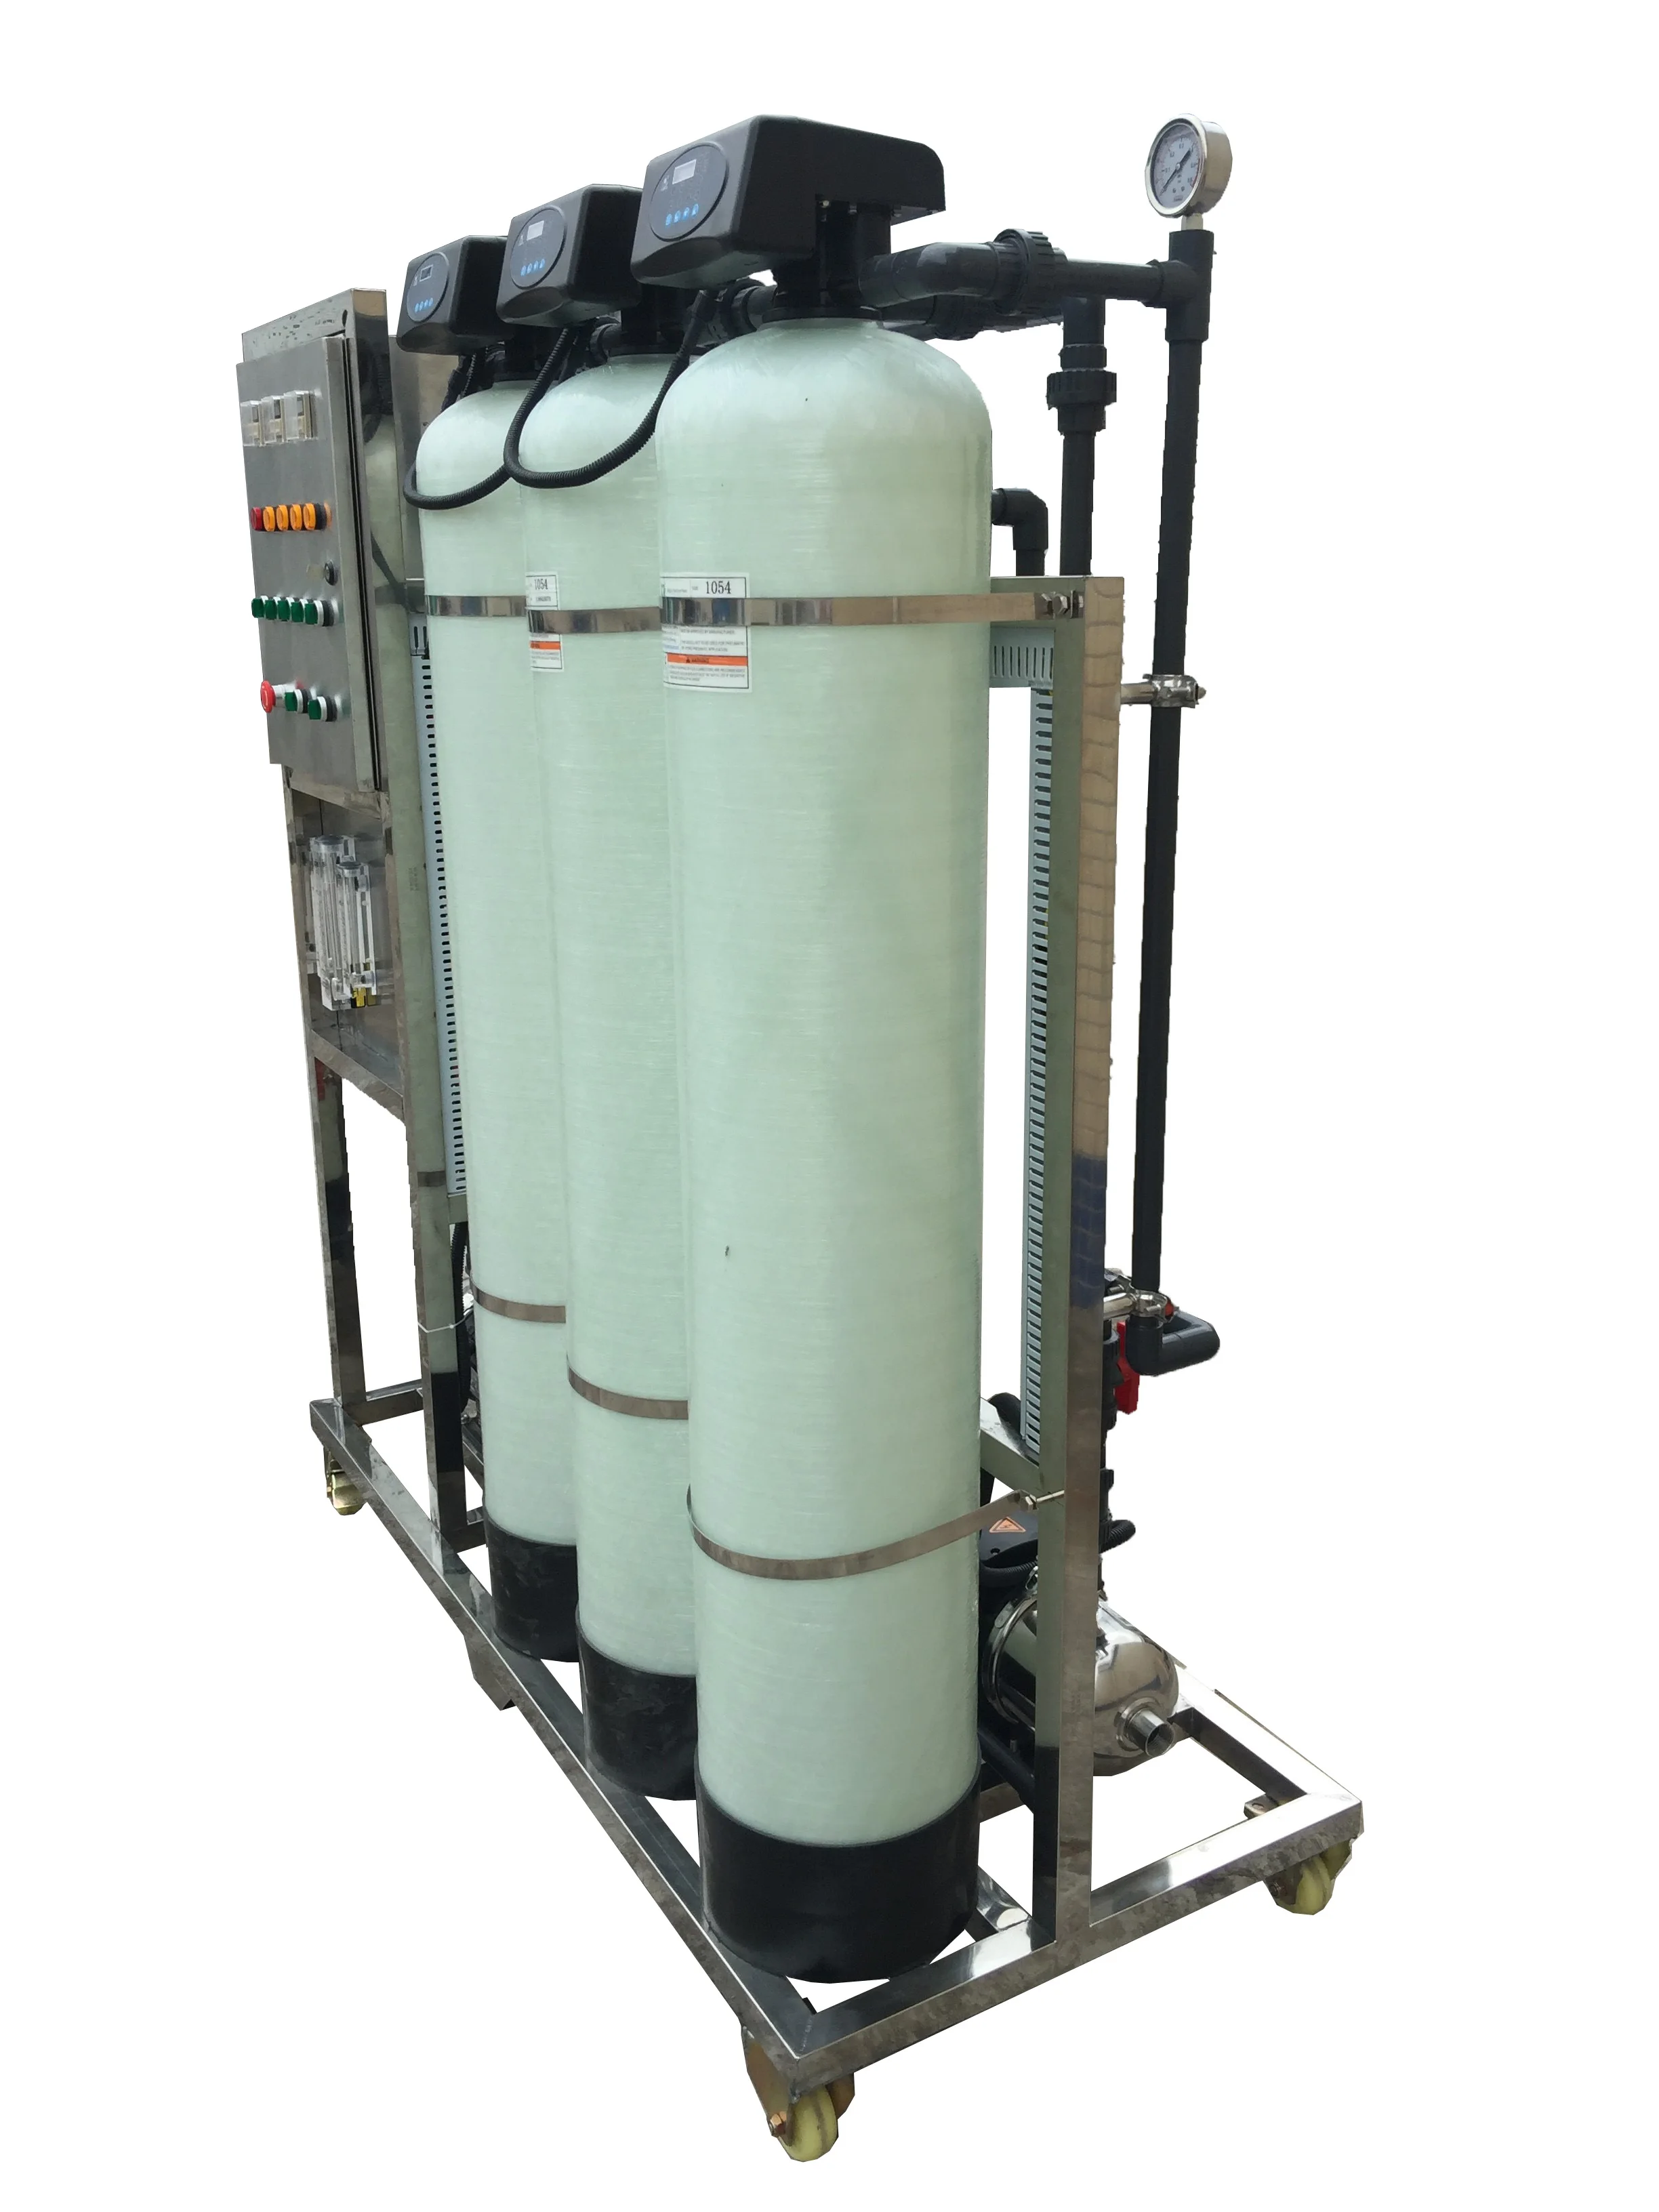 Water purifier UF system ultrafiltration filter for sale